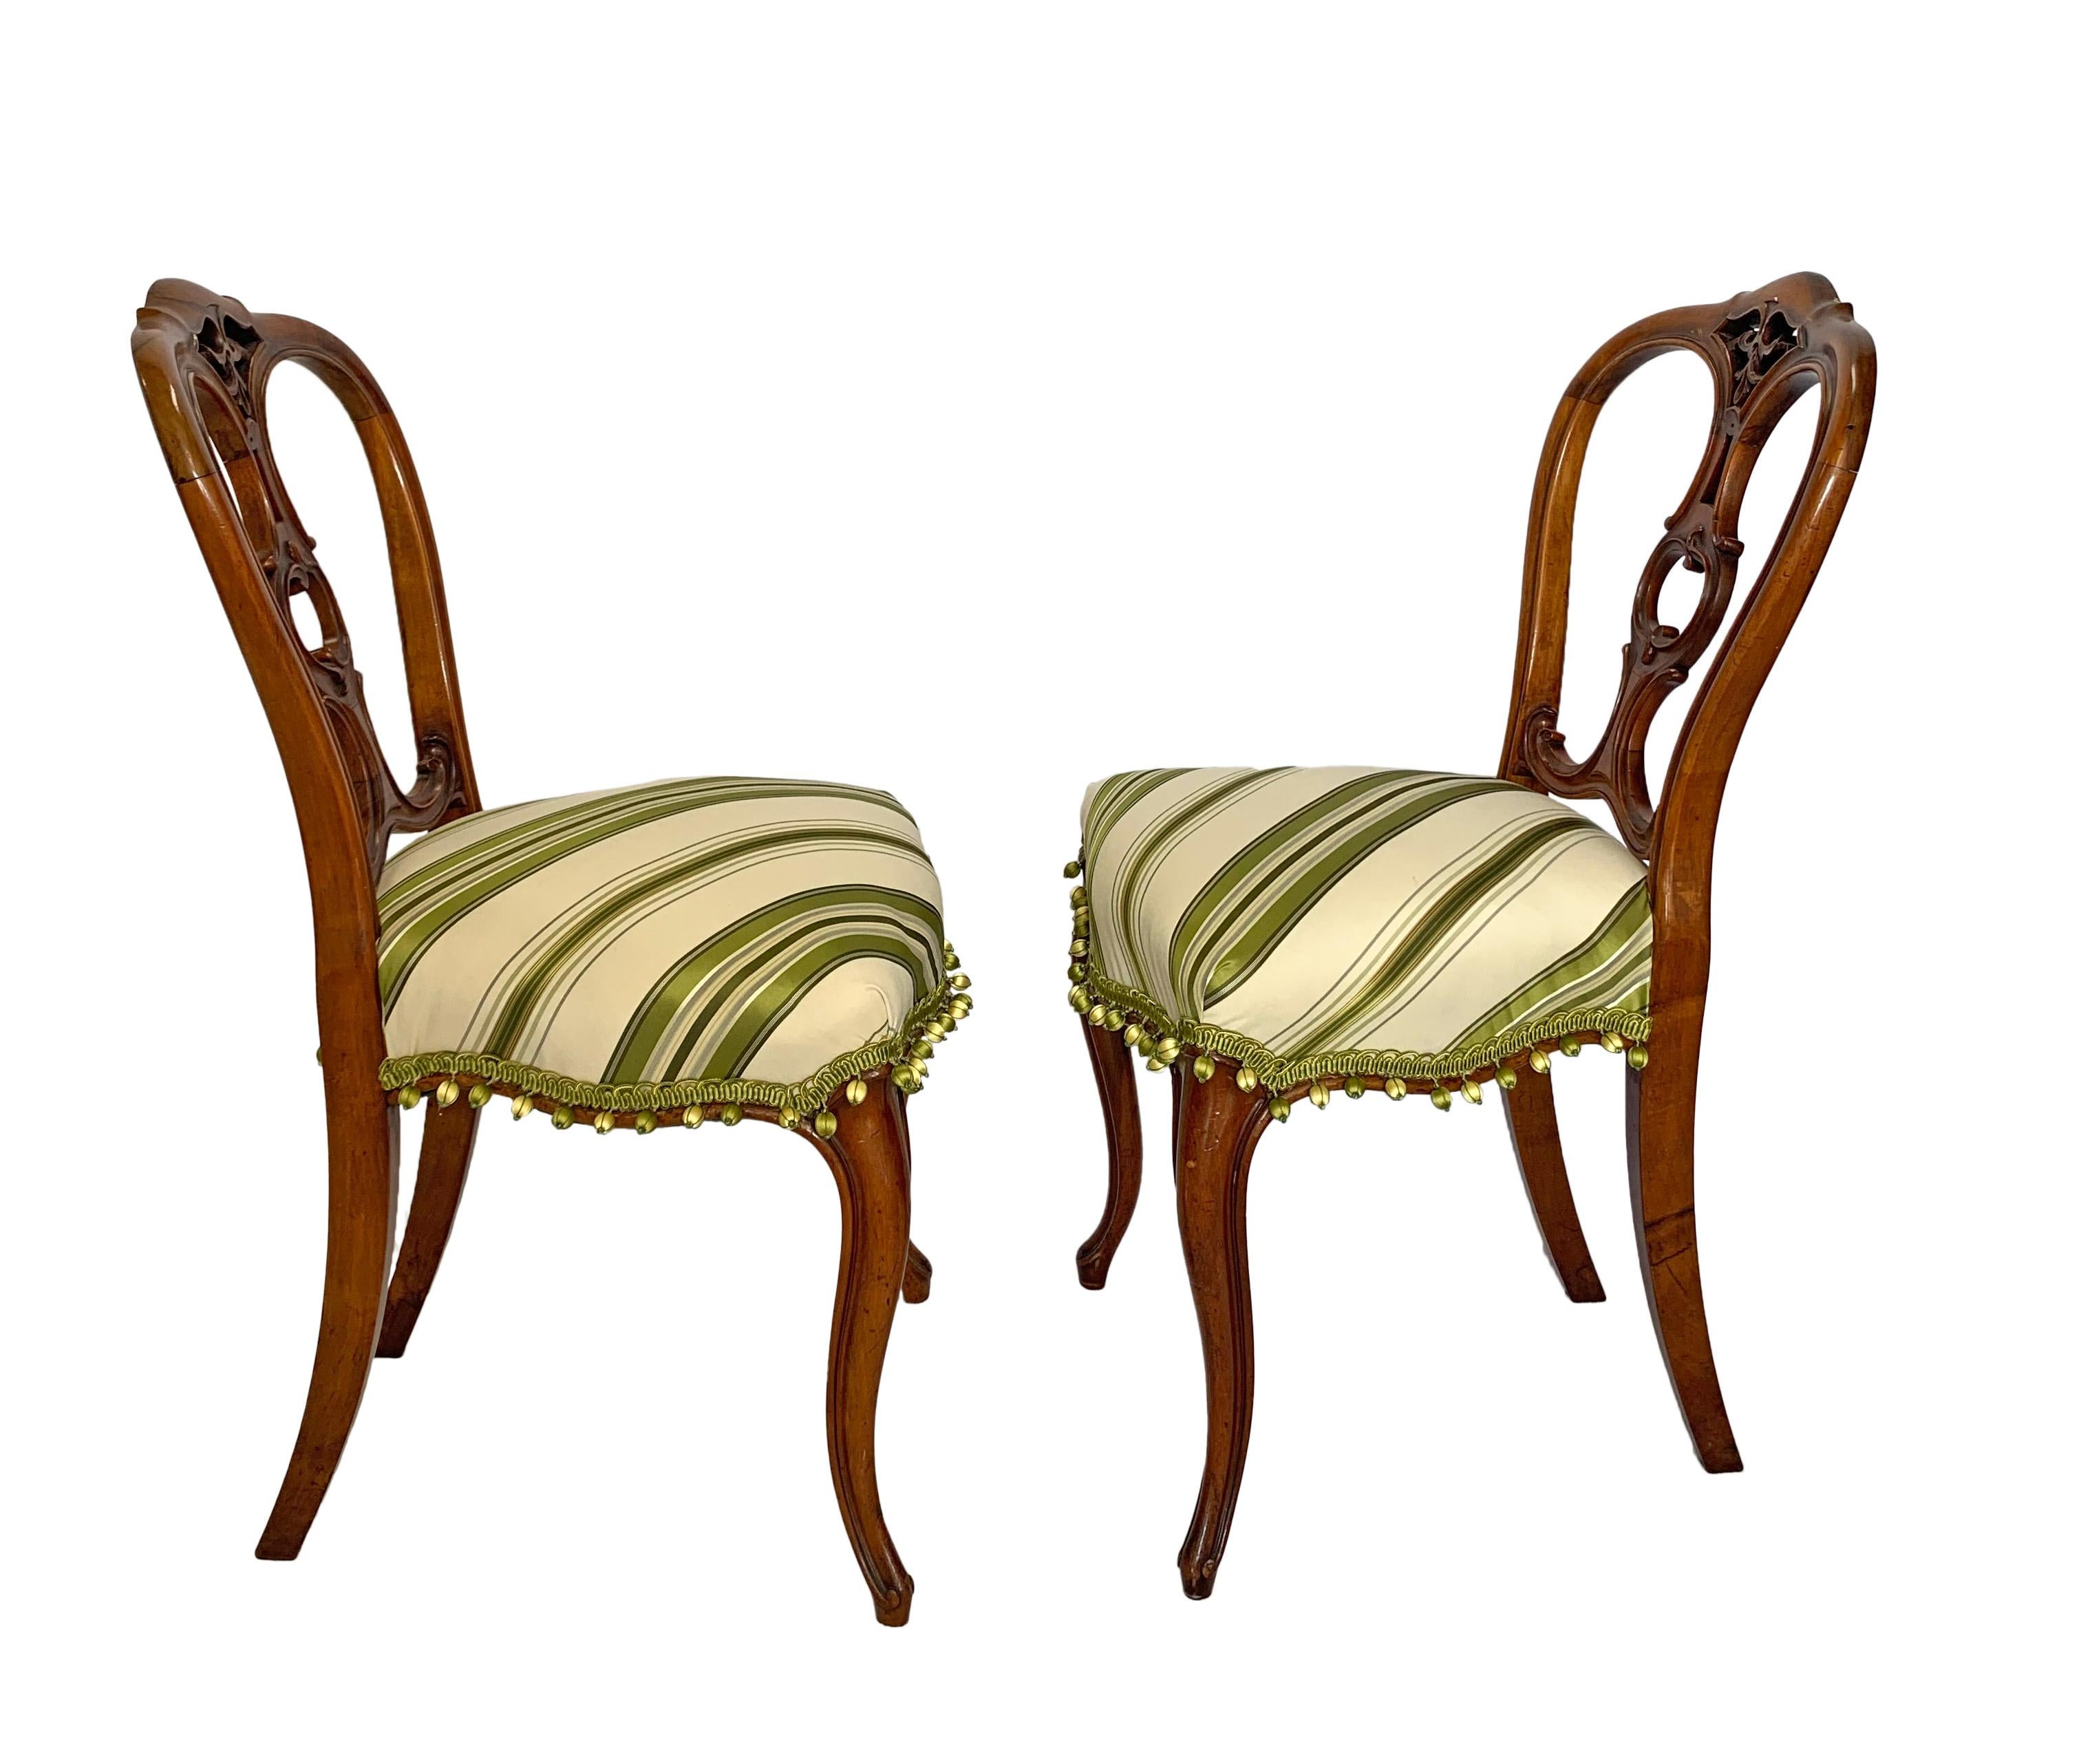 Early 20th Century Petite Victorian Style Elegantly Sculpted Balloon Back Chairs For Sale 3